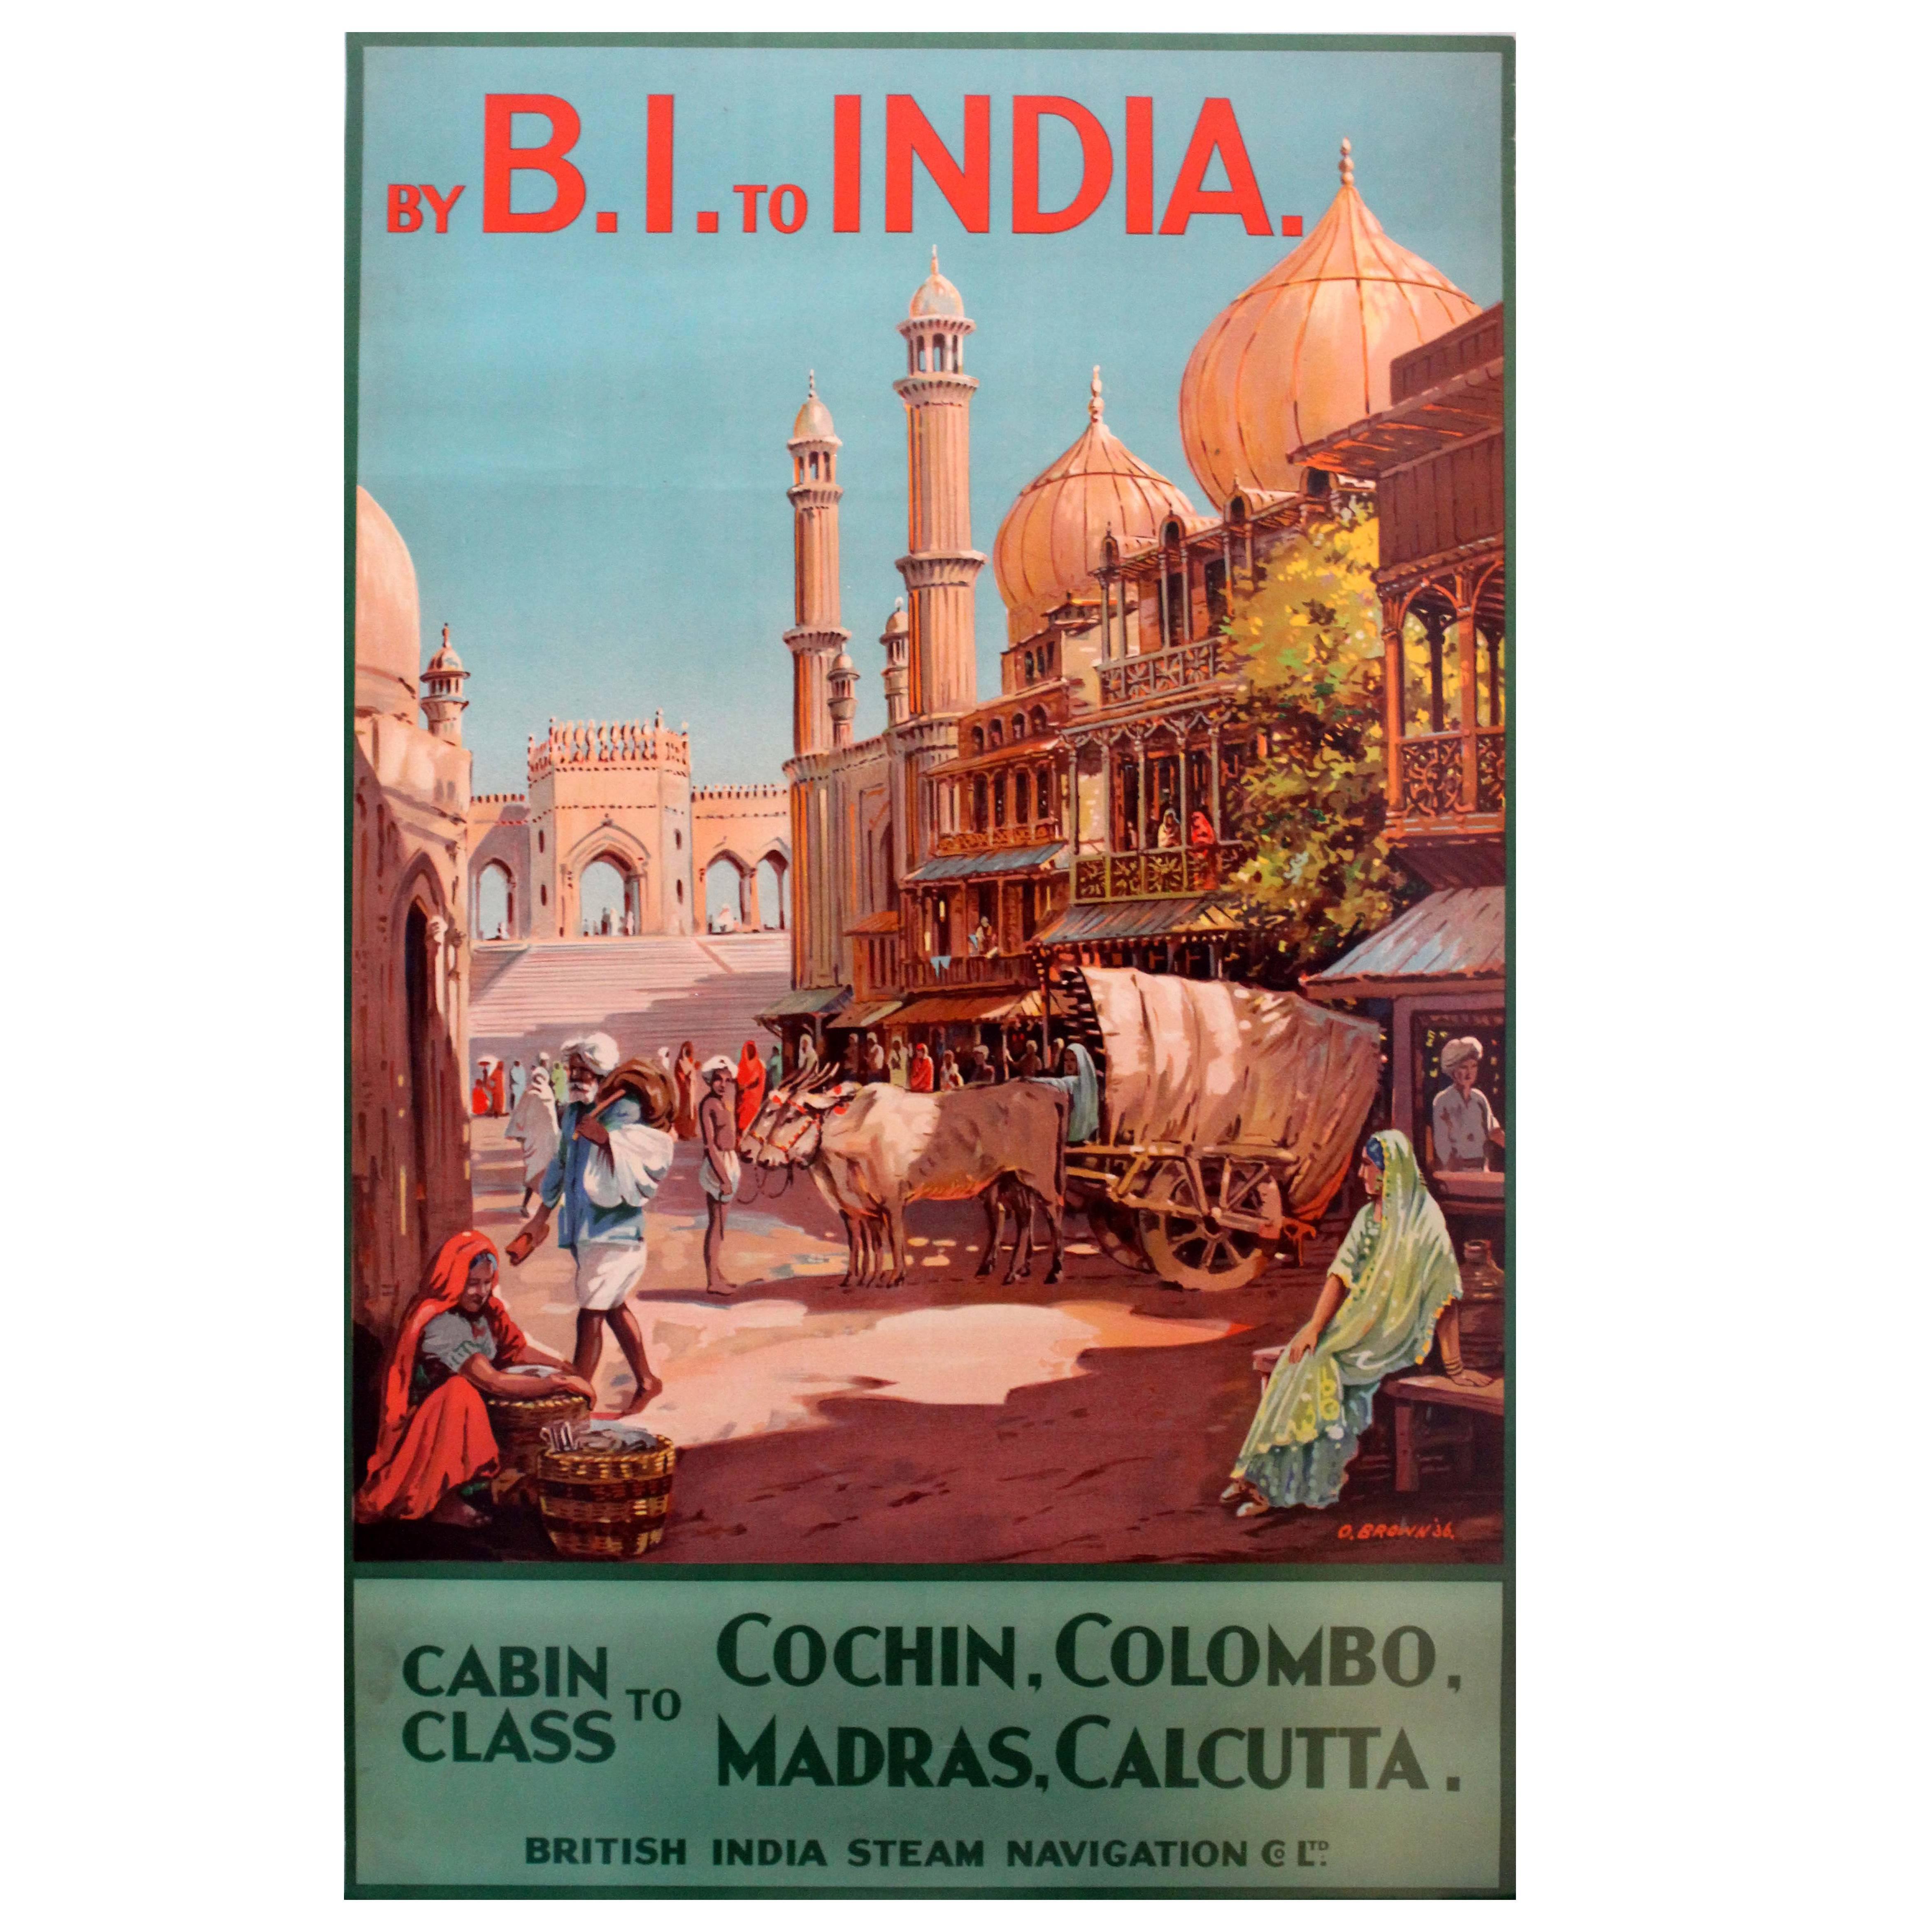 Original 1930s British India Steam Navigation Company Poster “By B.I. to India”